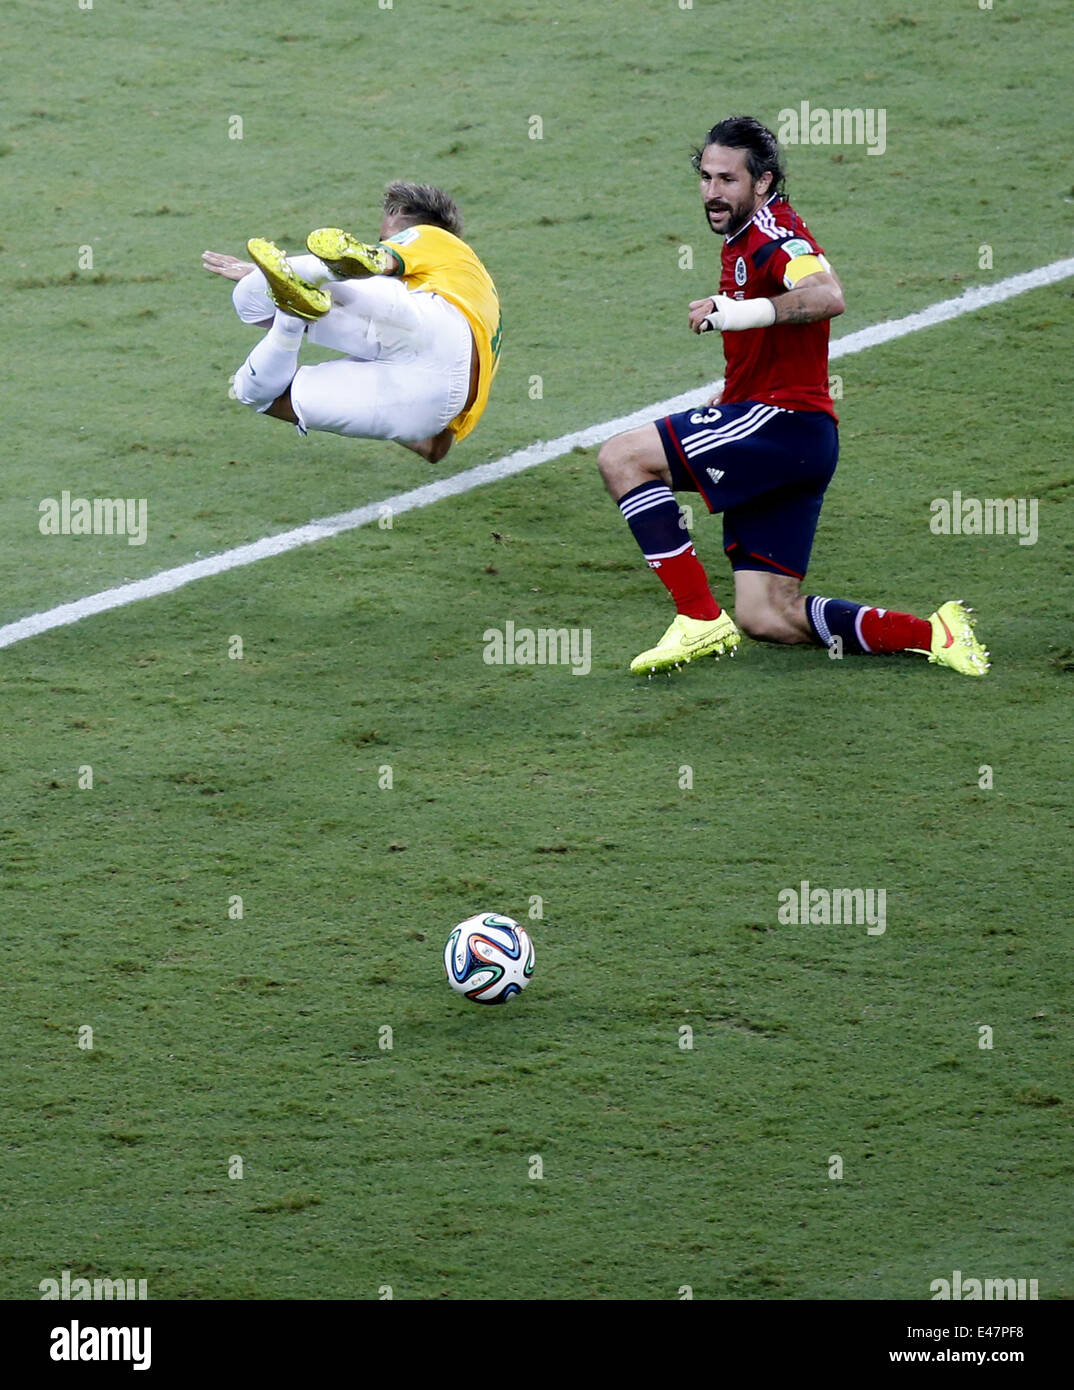 Fortaleza, Brazil. 4th July, 2014. Brazil's Neymar (L) falls down during a quarter-finals match between Brazil and Colombia of 2014 FIFA World Cup at the Estadio Castelao Stadium in Fortaleza, Brazil, on July 4, 2014. Brazil won 2-1 over Colombia and qualified for semi-finals on Friday. Credit:  Liao Yujie/Xinhua/Alamy Live News Stock Photo